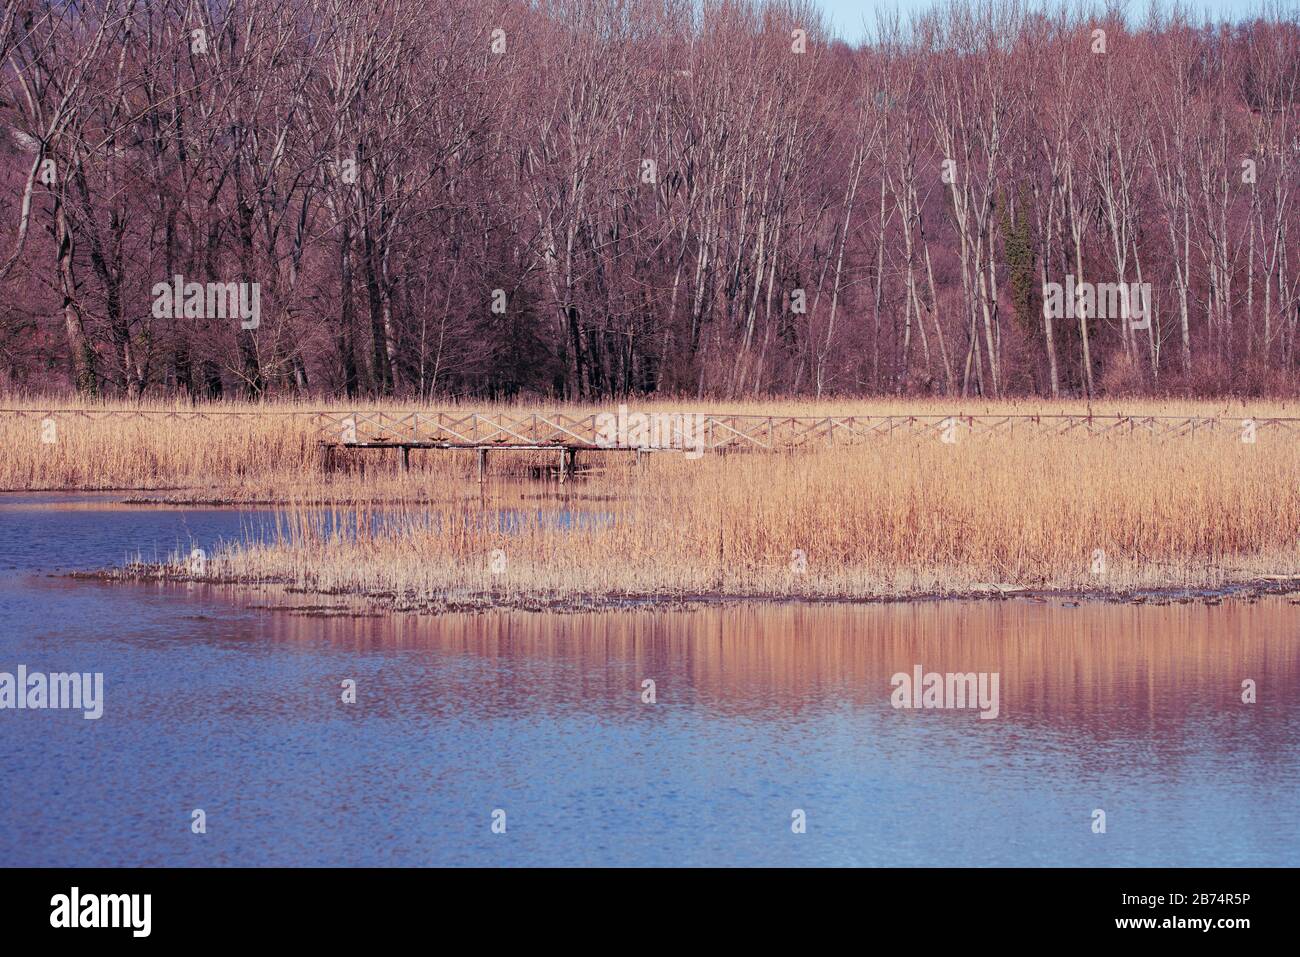 Landscape depicting a reed bed on the river crossed by a wooden bridge Stock Photo